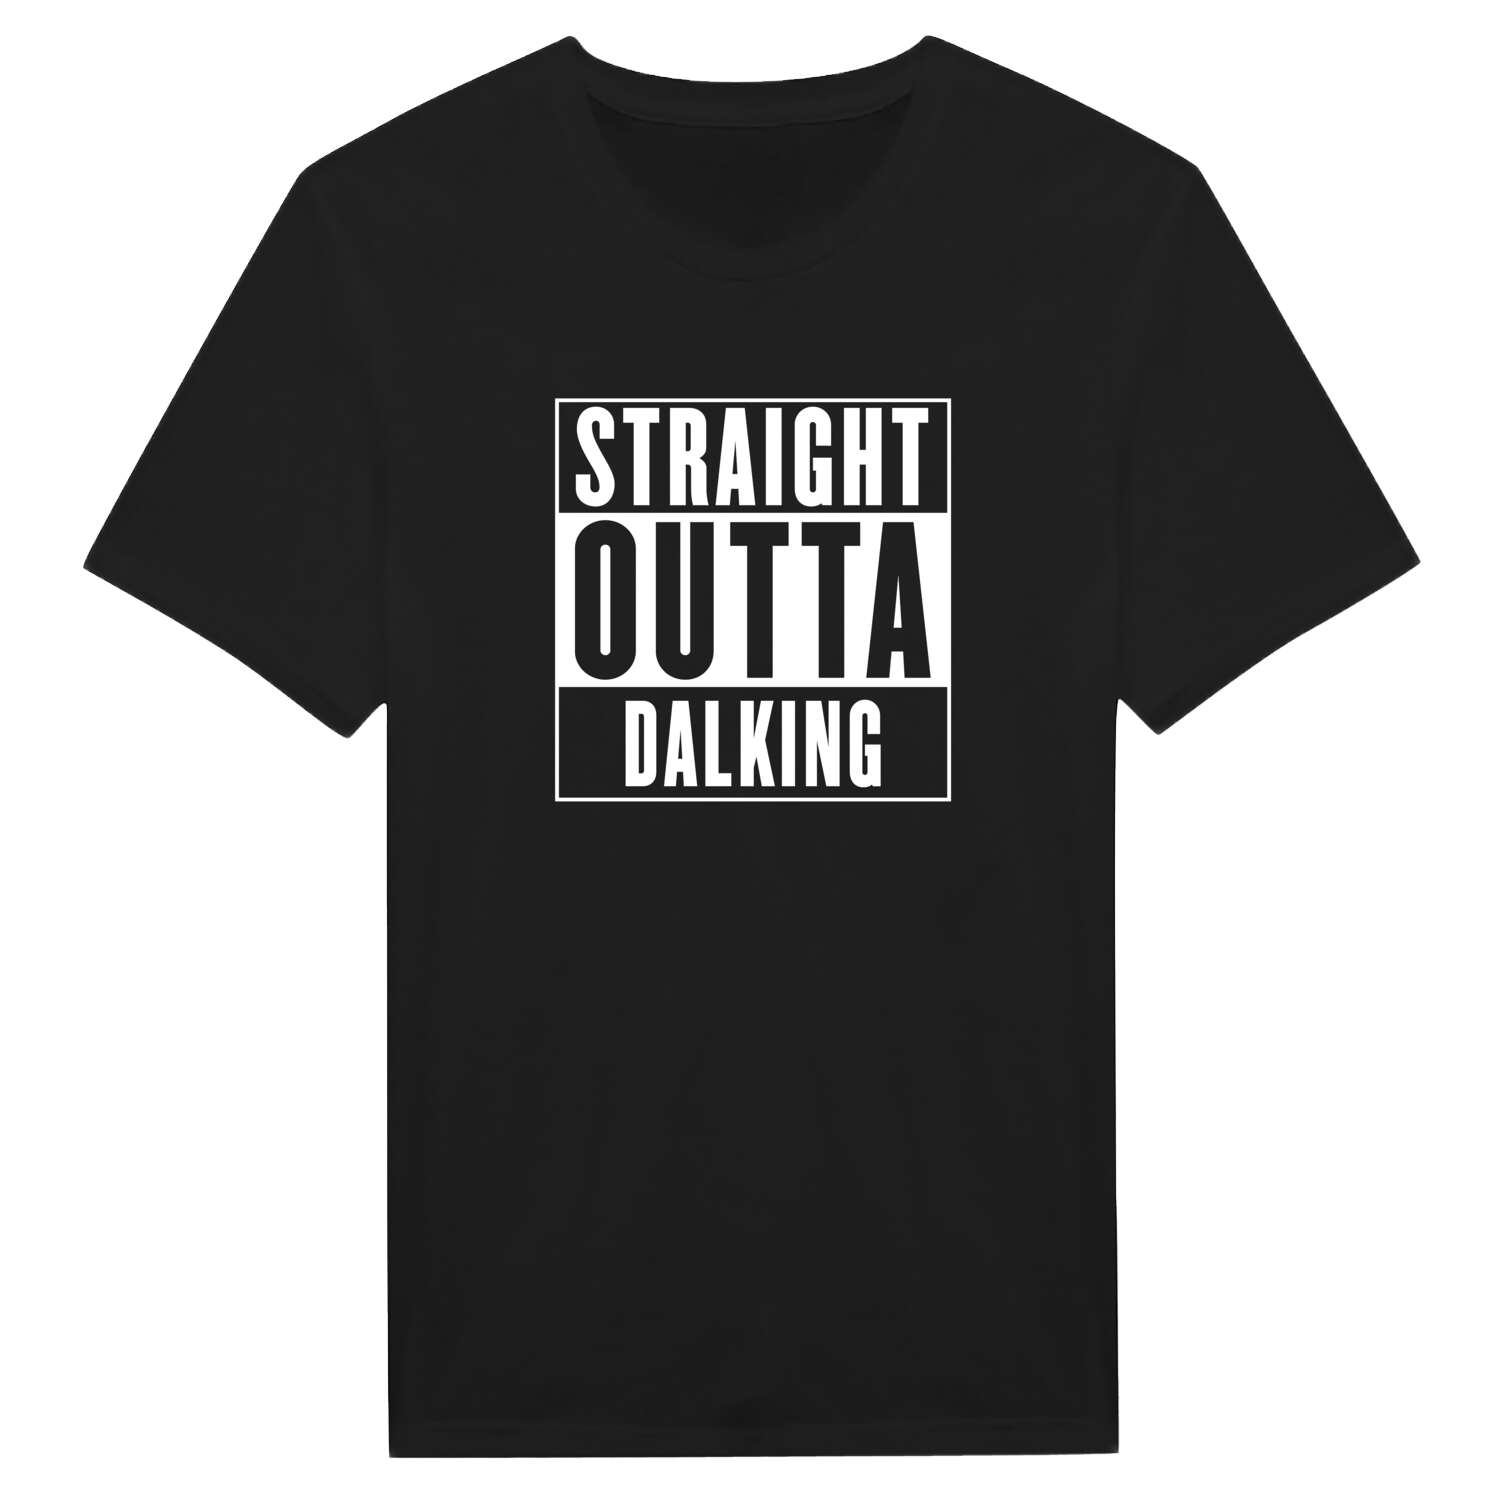 Dalking T-Shirt »Straight Outta«